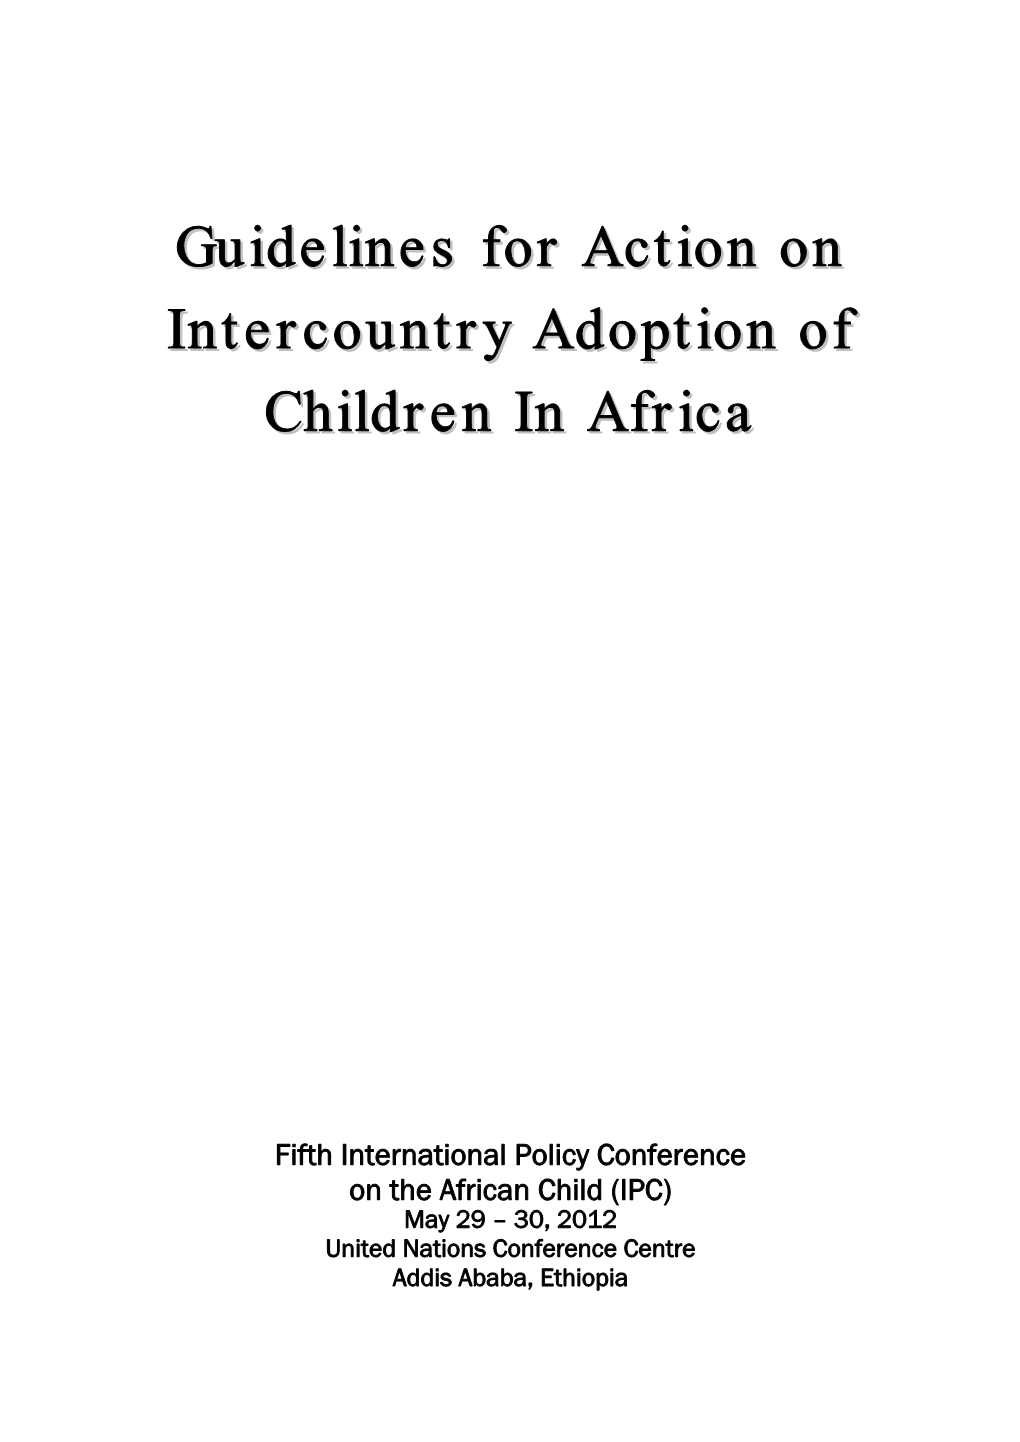 The African Child Policy Forum